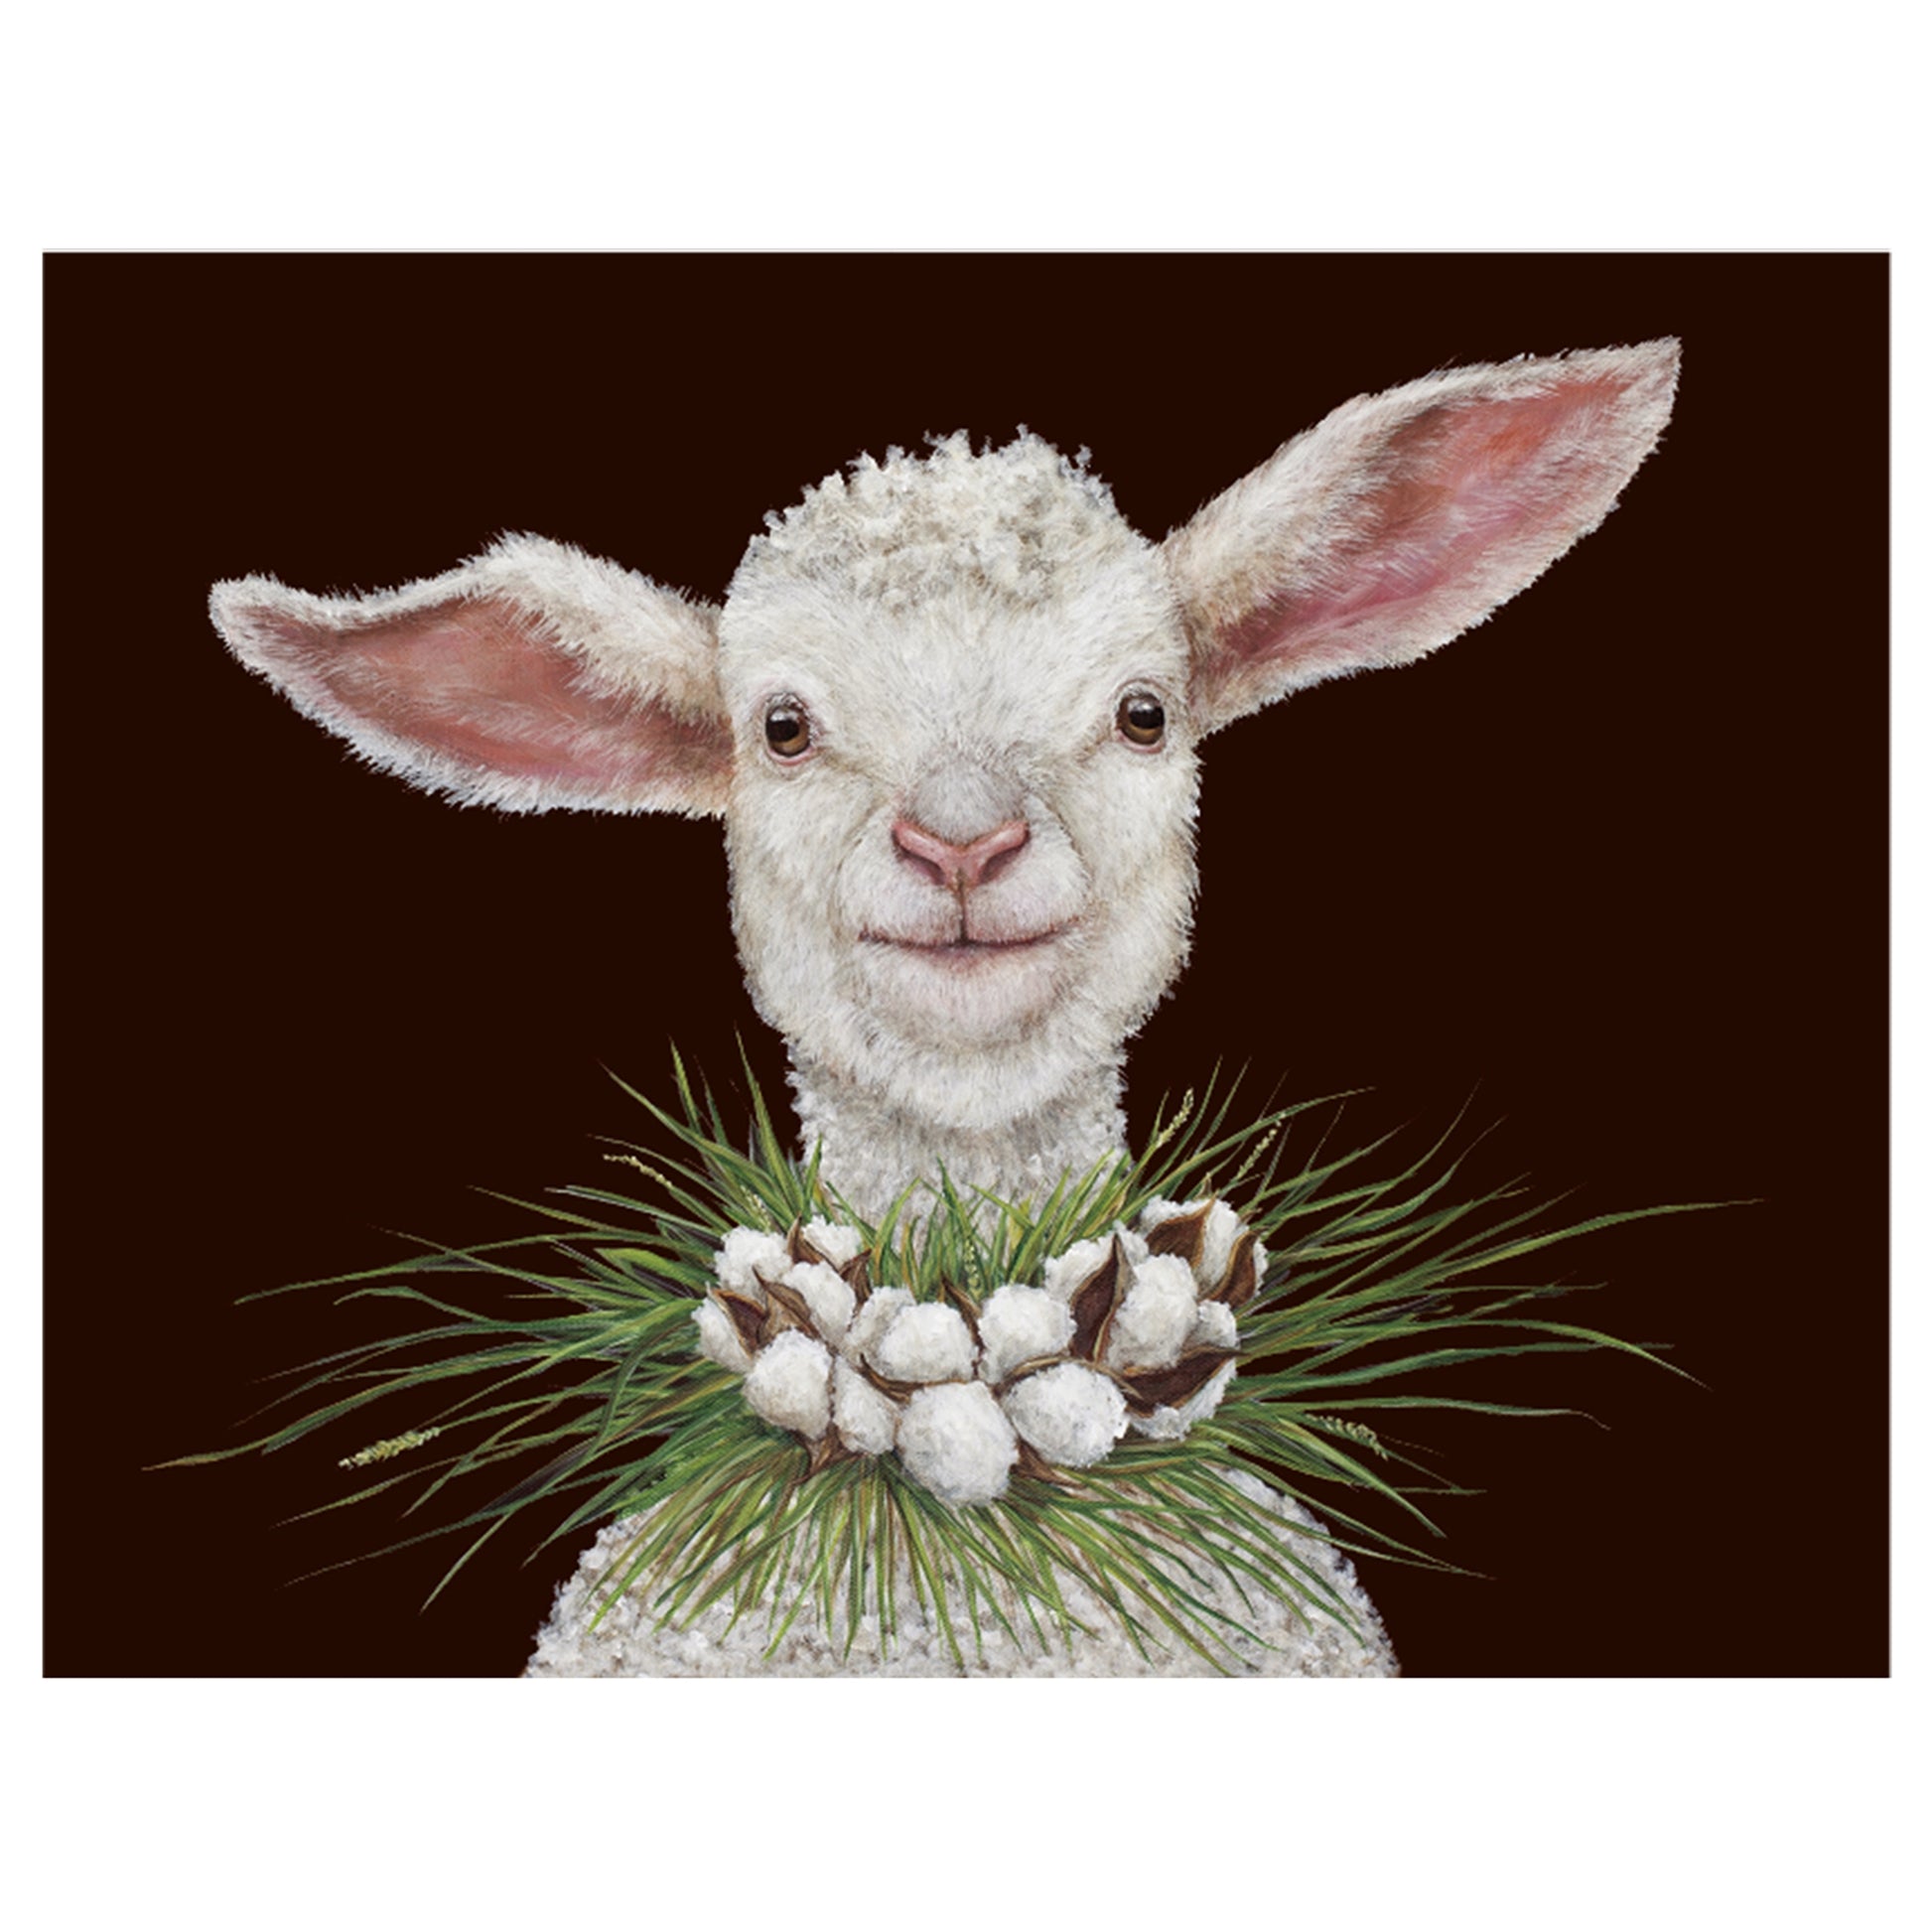 A sweet baby lamb with a grass and cotton ball wreath around her neck 